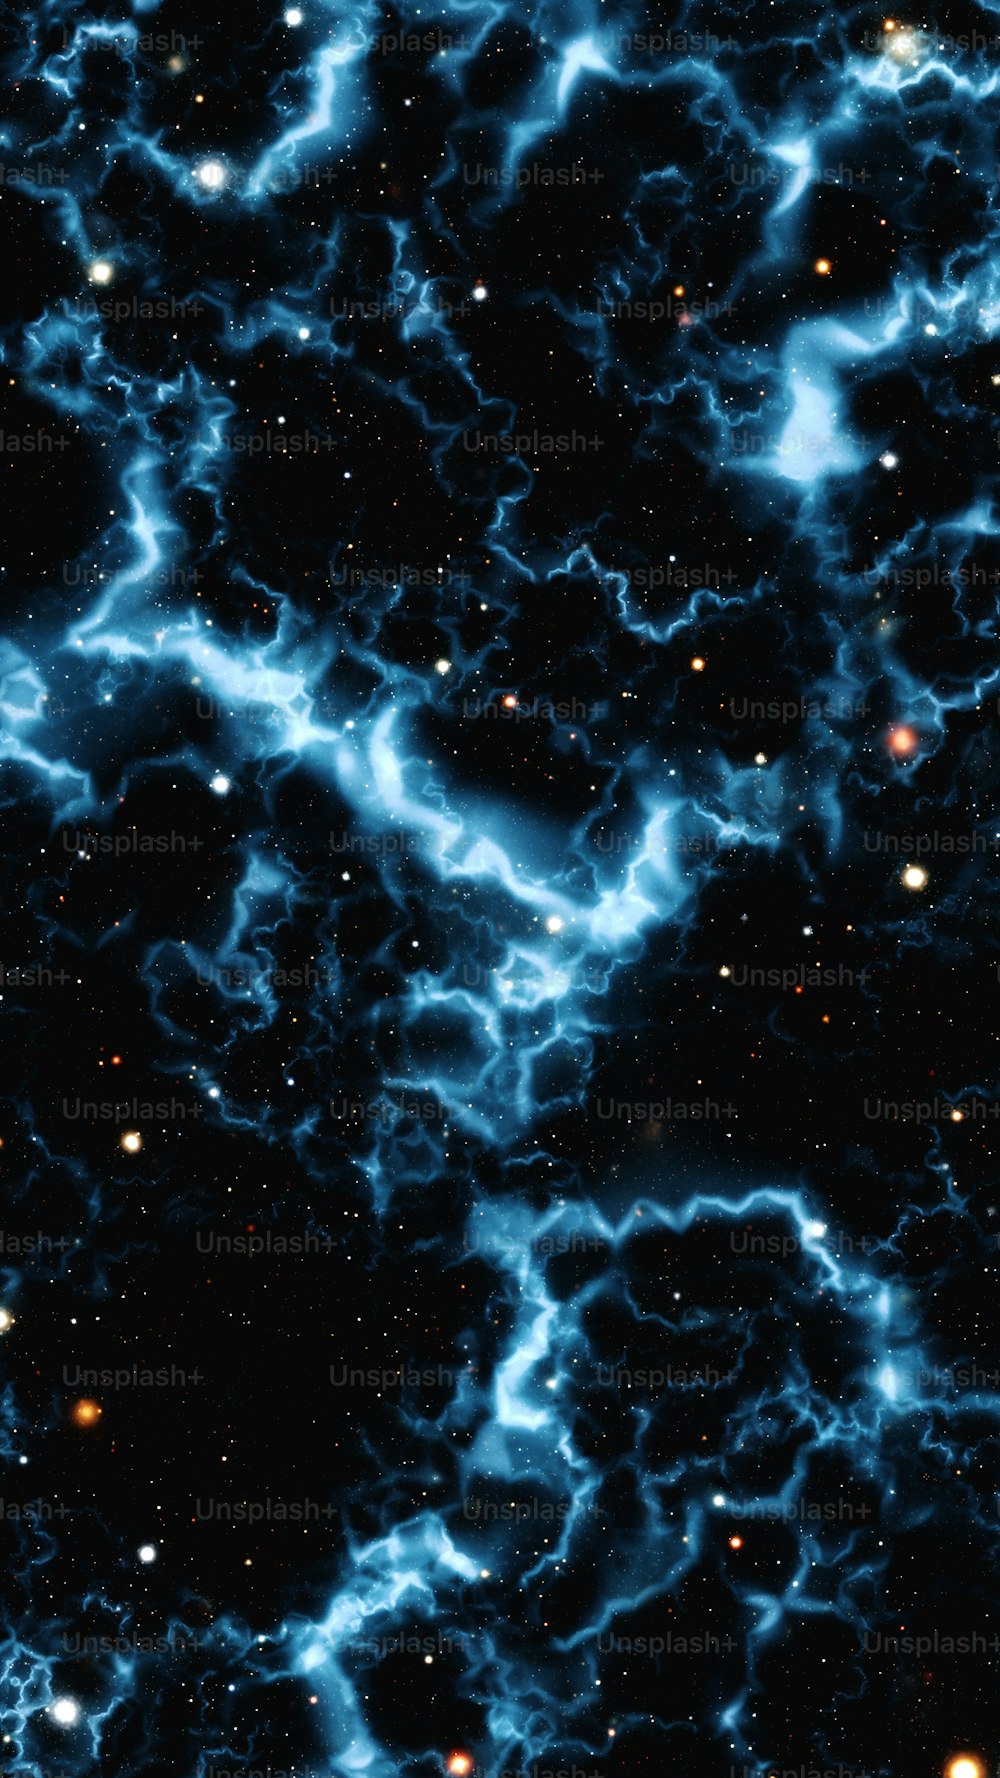 a black background with blue swirls and stars